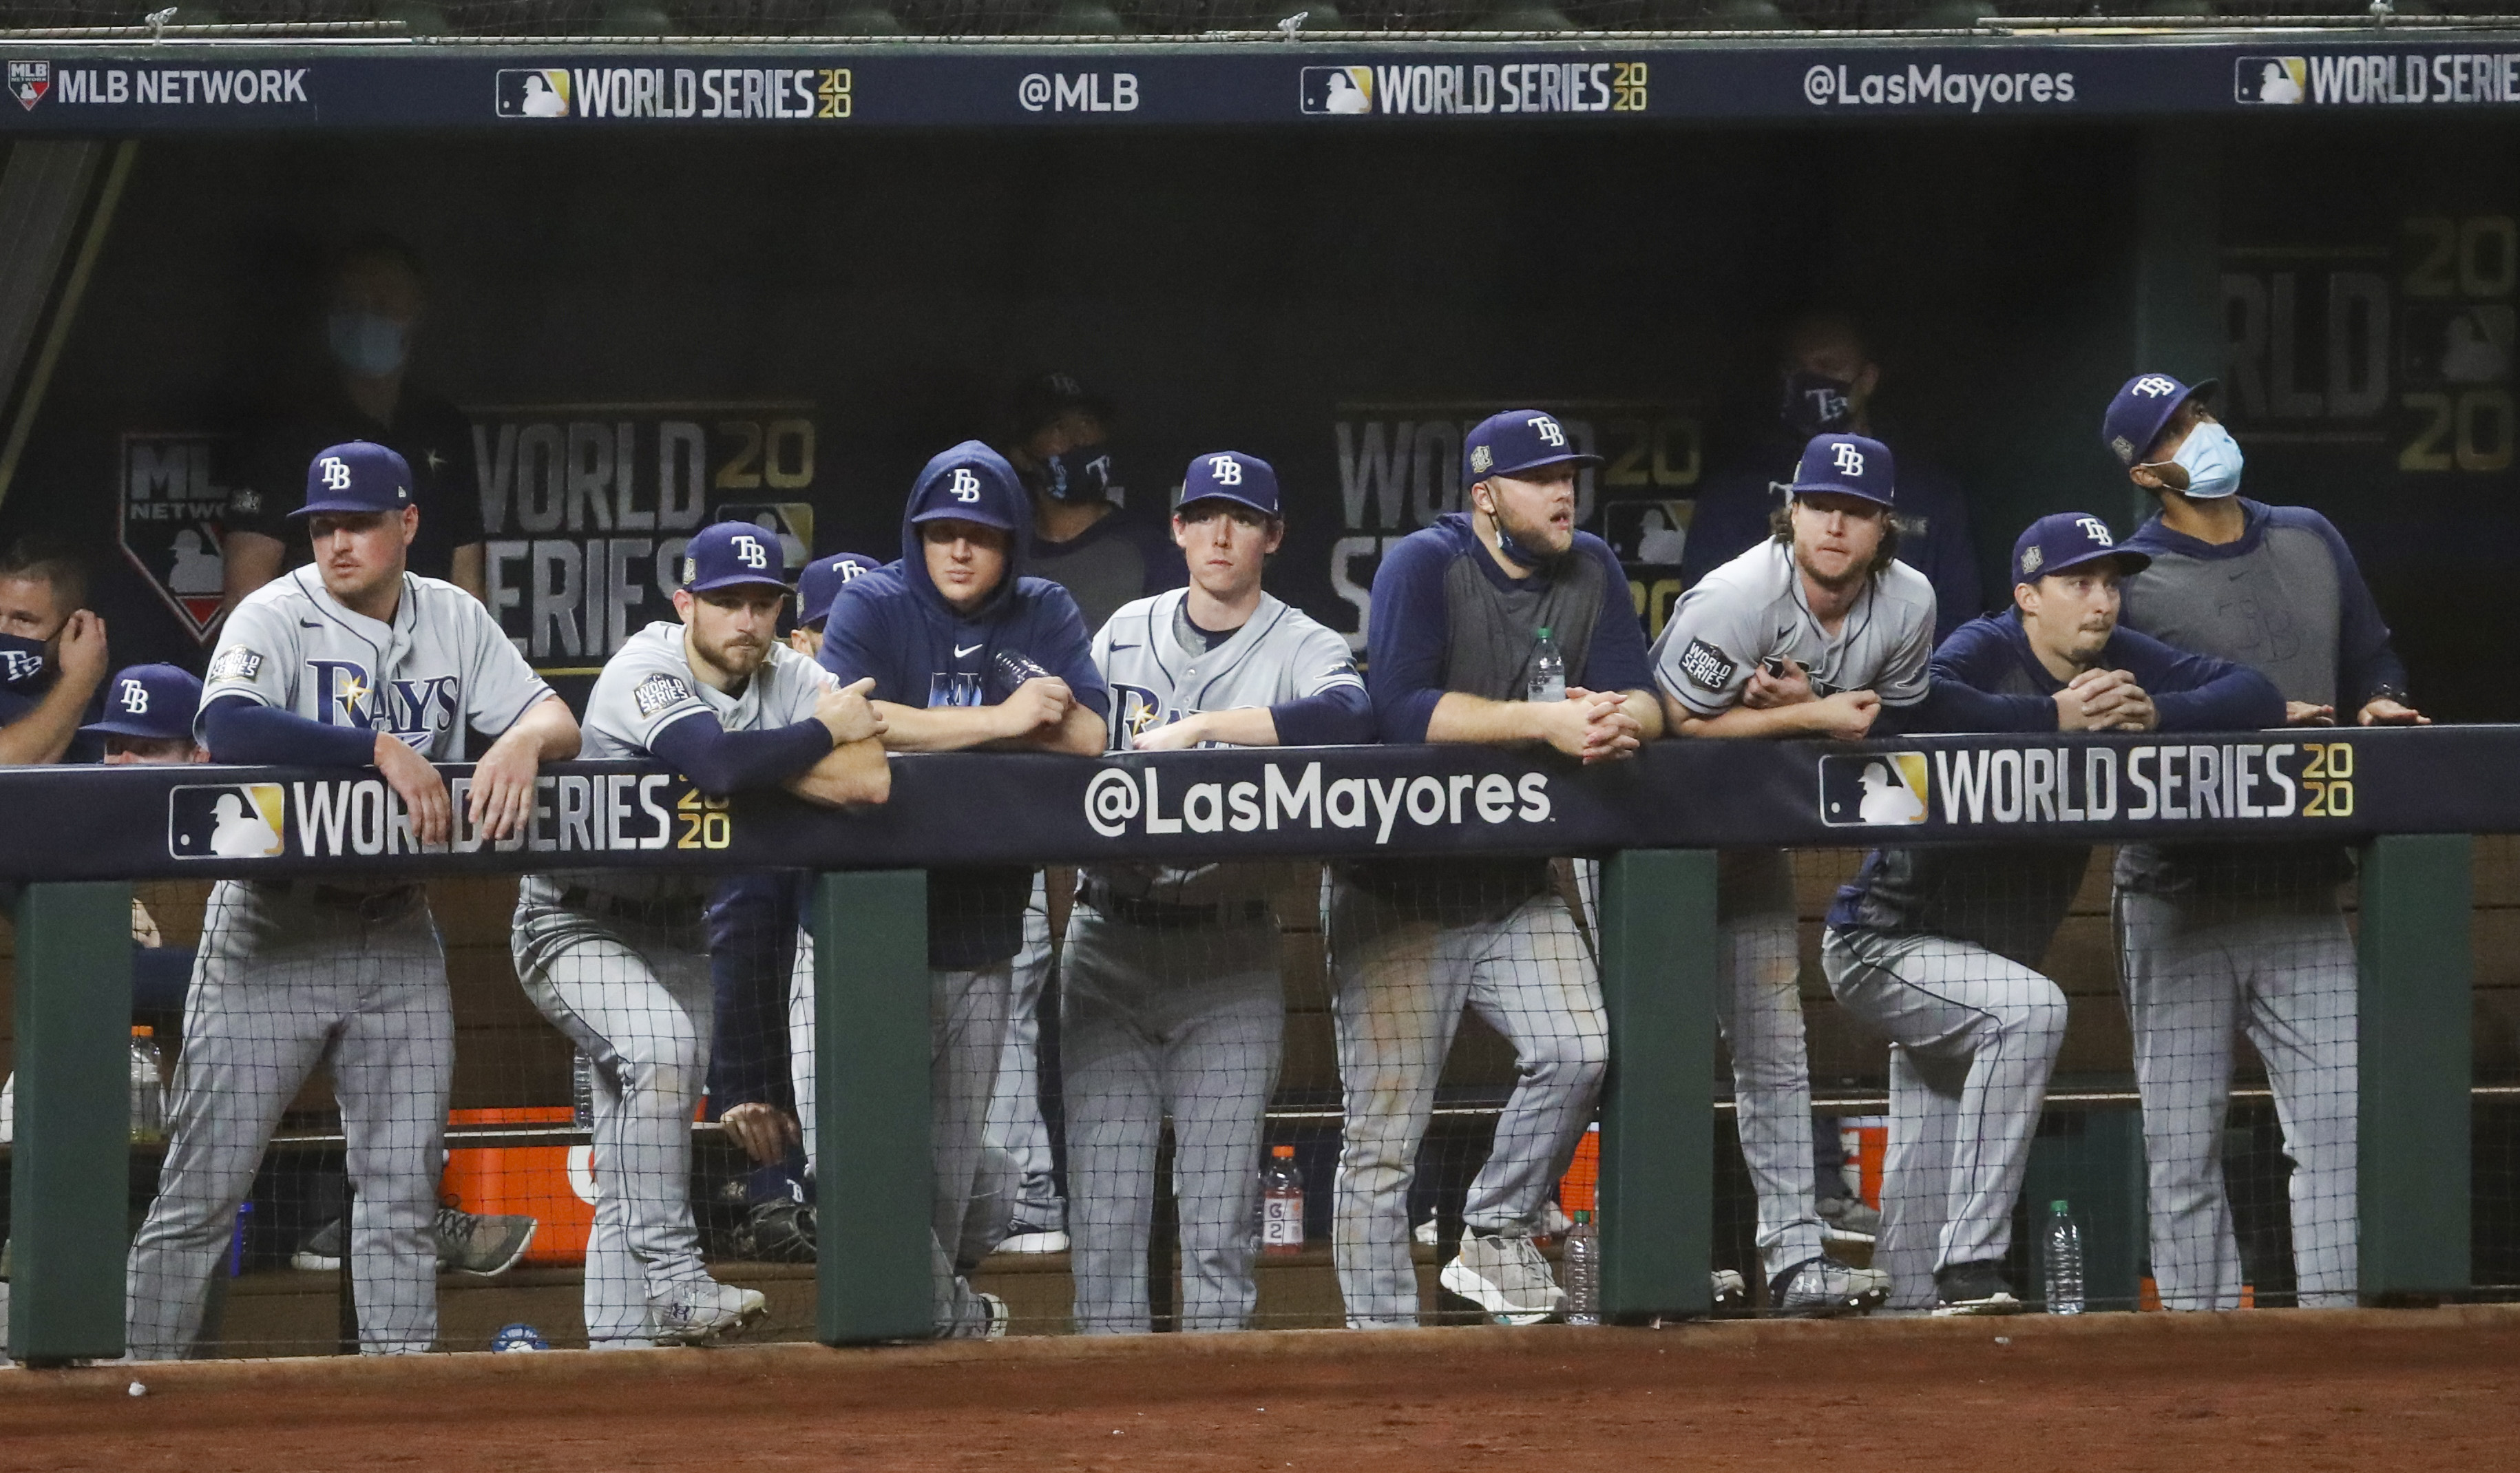 Baseball History Tells Us the Tampa Bay Rays Are Going to the World Series  - Fastball